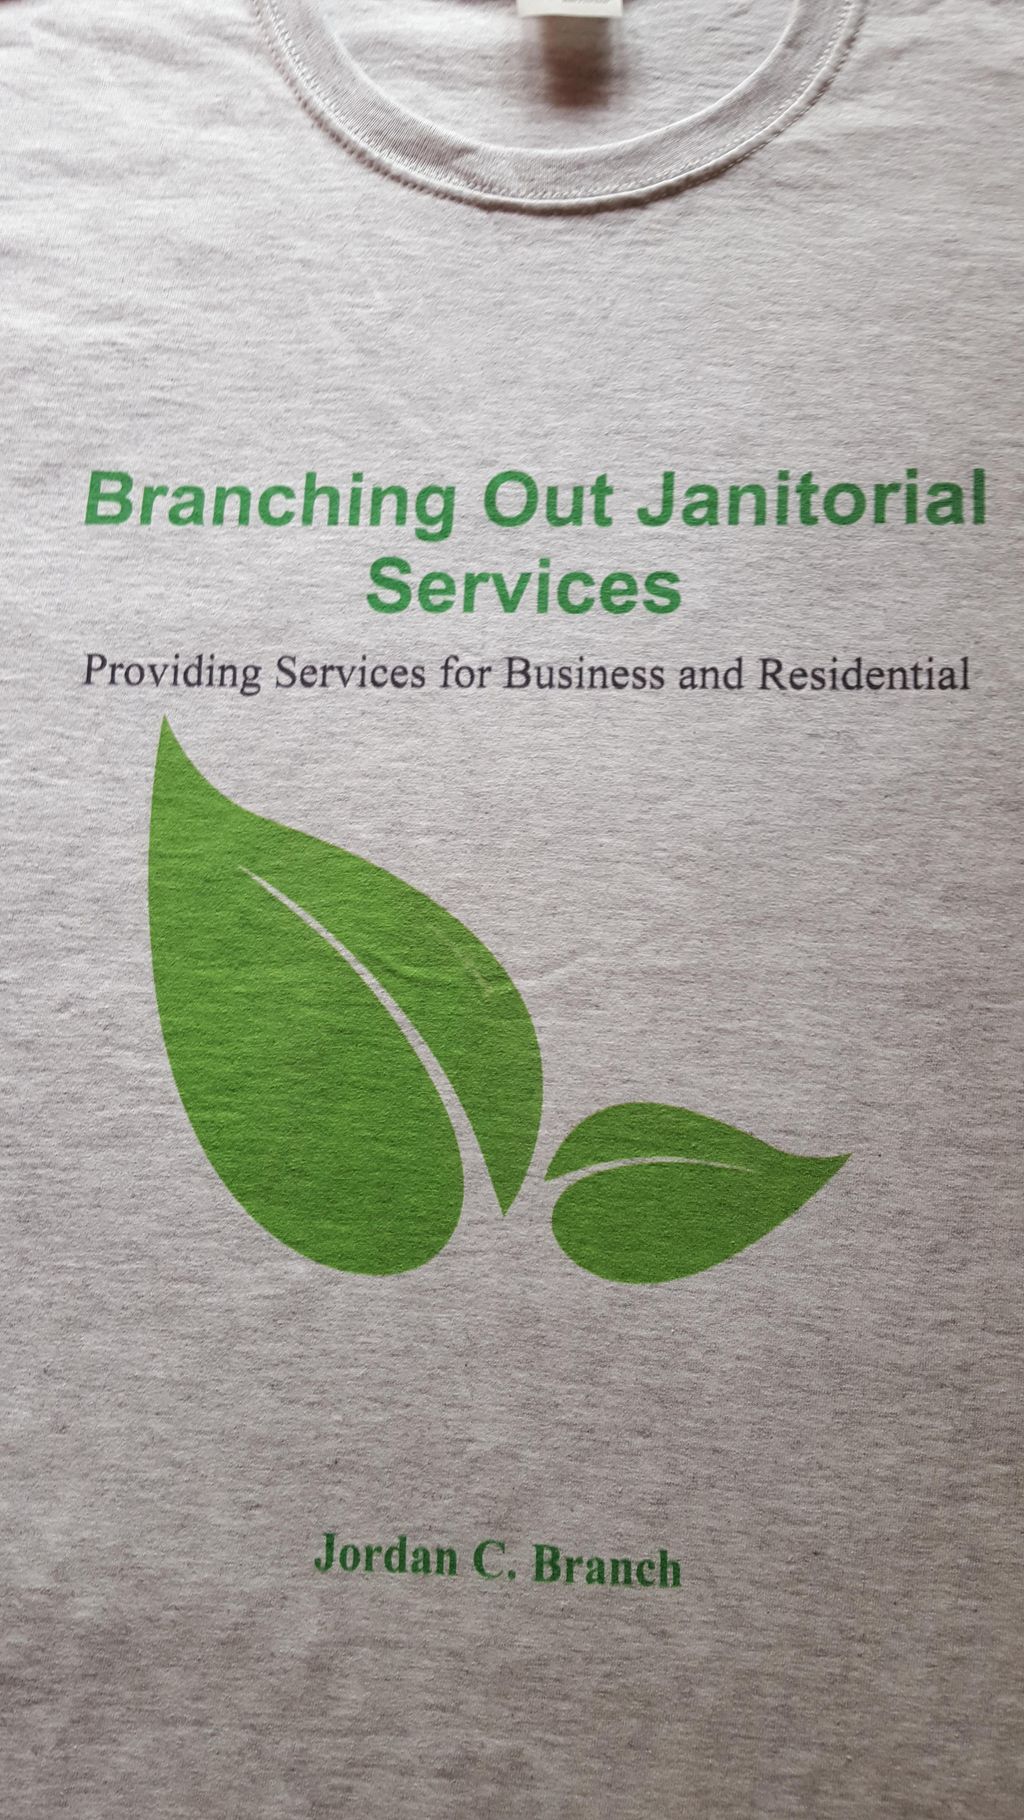 Branching Out Janitorial Services